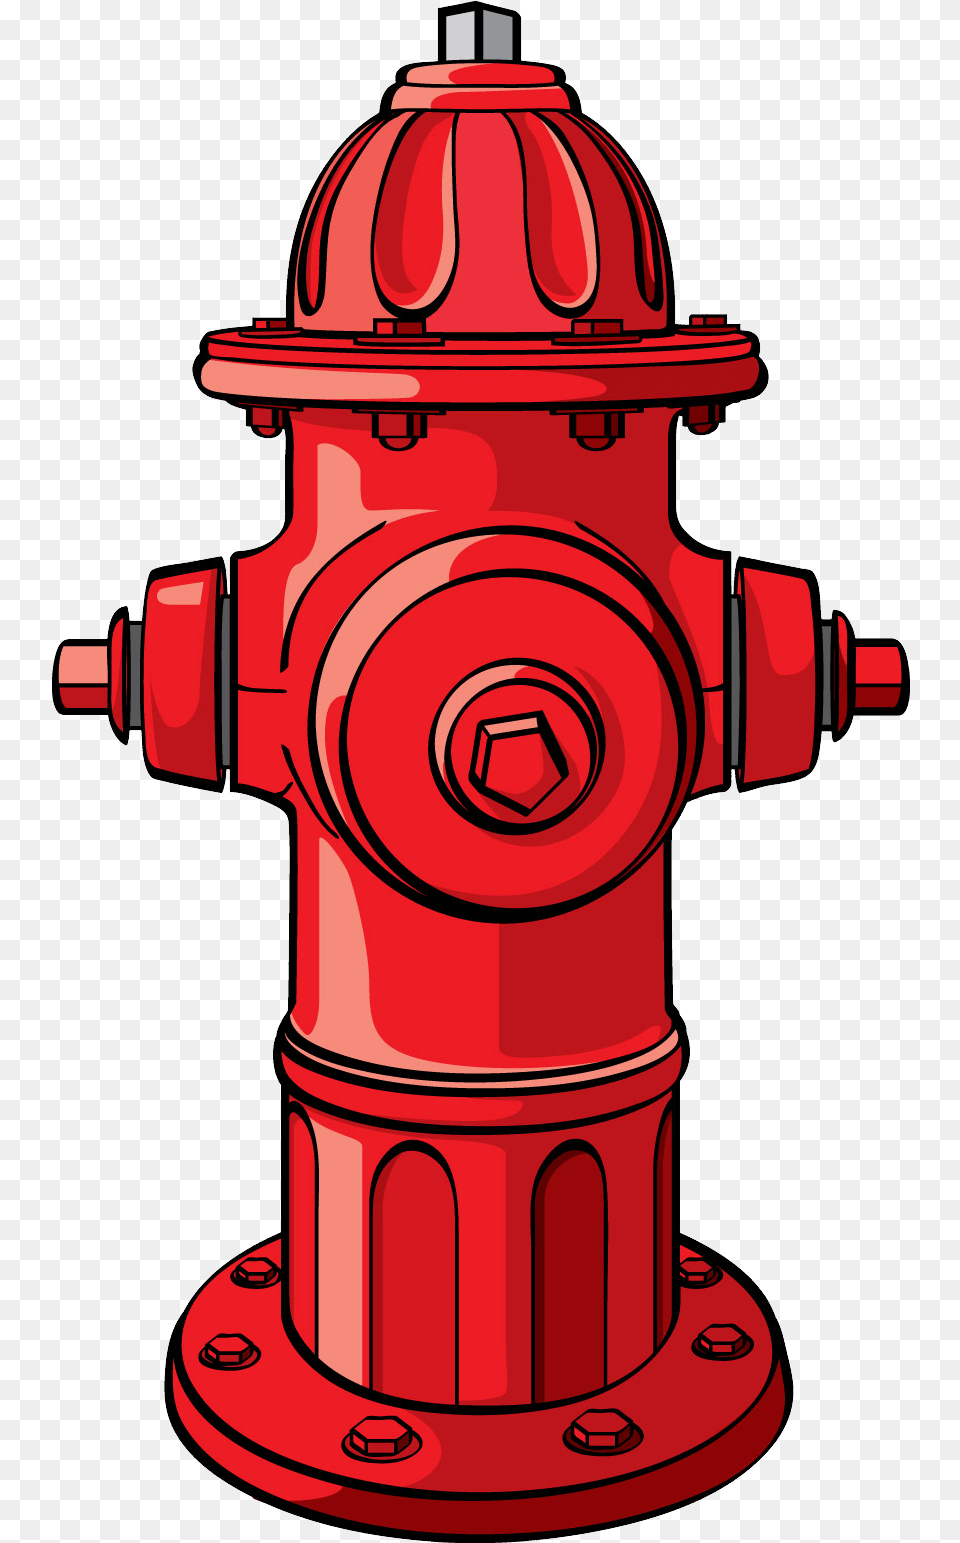 Download Fire Hydrant Image For Fire Hydrant Clipart, Fire Hydrant, Dynamite, Weapon Free Transparent Png